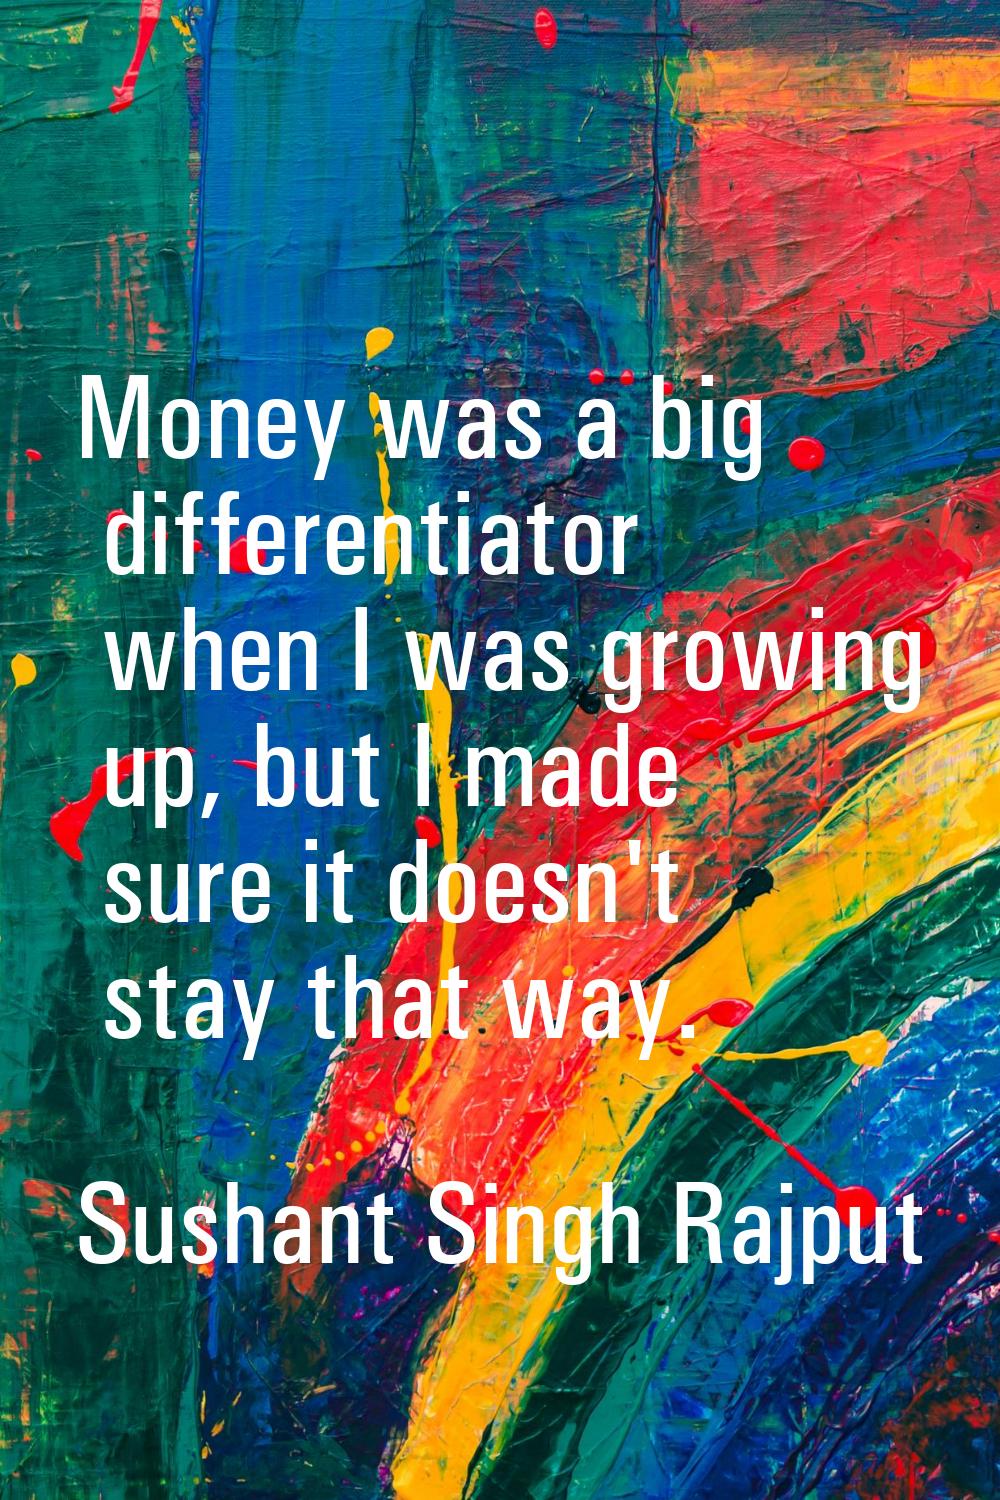 Money was a big differentiator when I was growing up, but I made sure it doesn't stay that way.